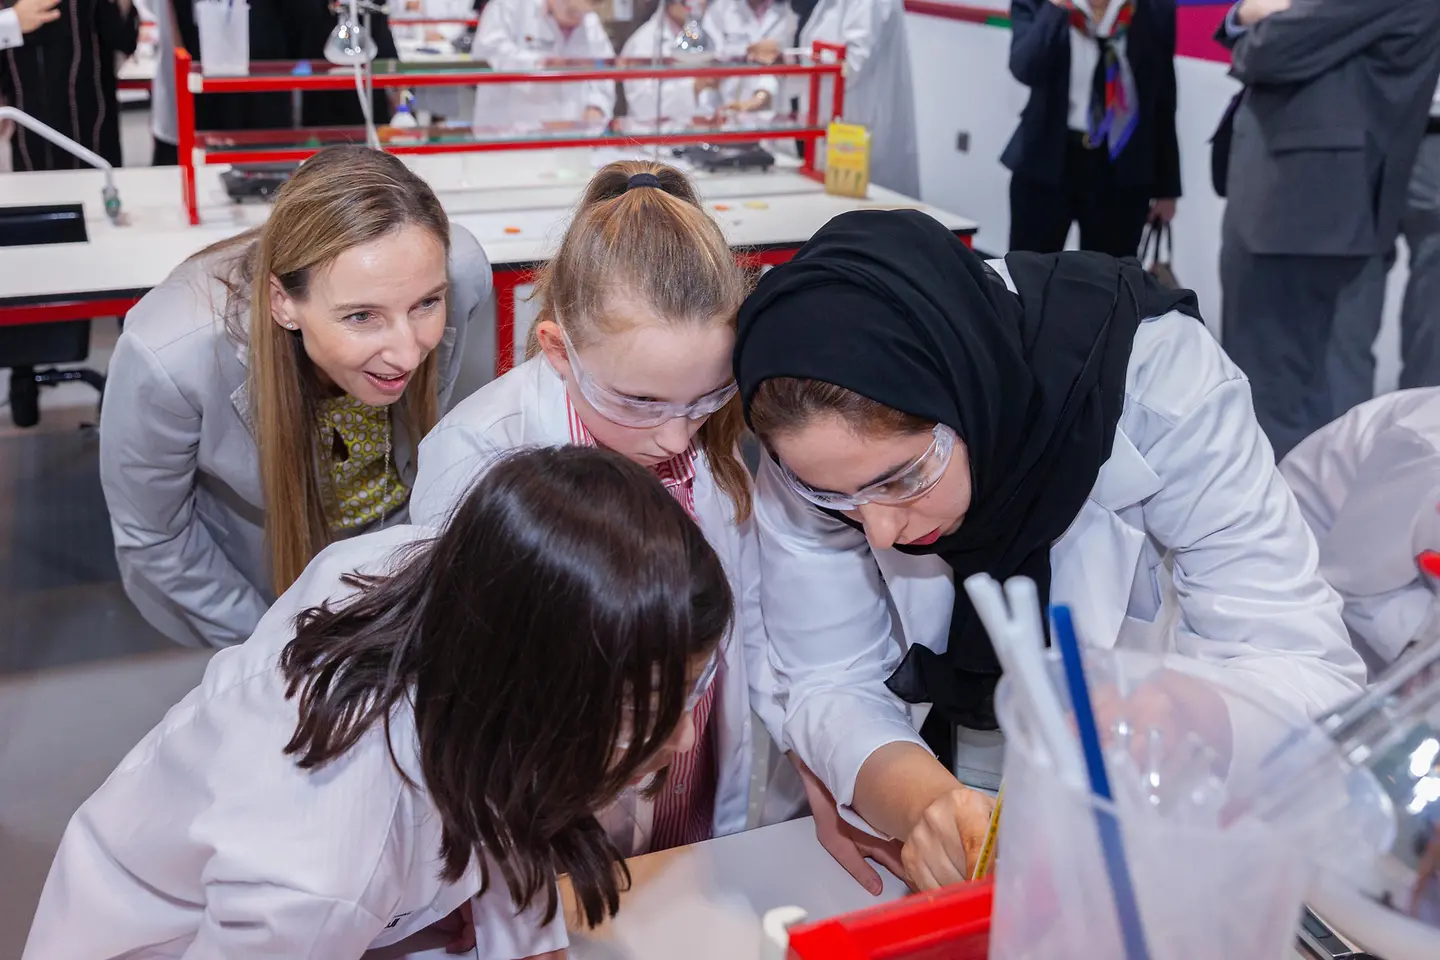 Dr. Simone Bagel-Trah, Chairwoman of the Supervisory Board and the Shareholders’ Committee of Henkel, watching kids while conducting experiments